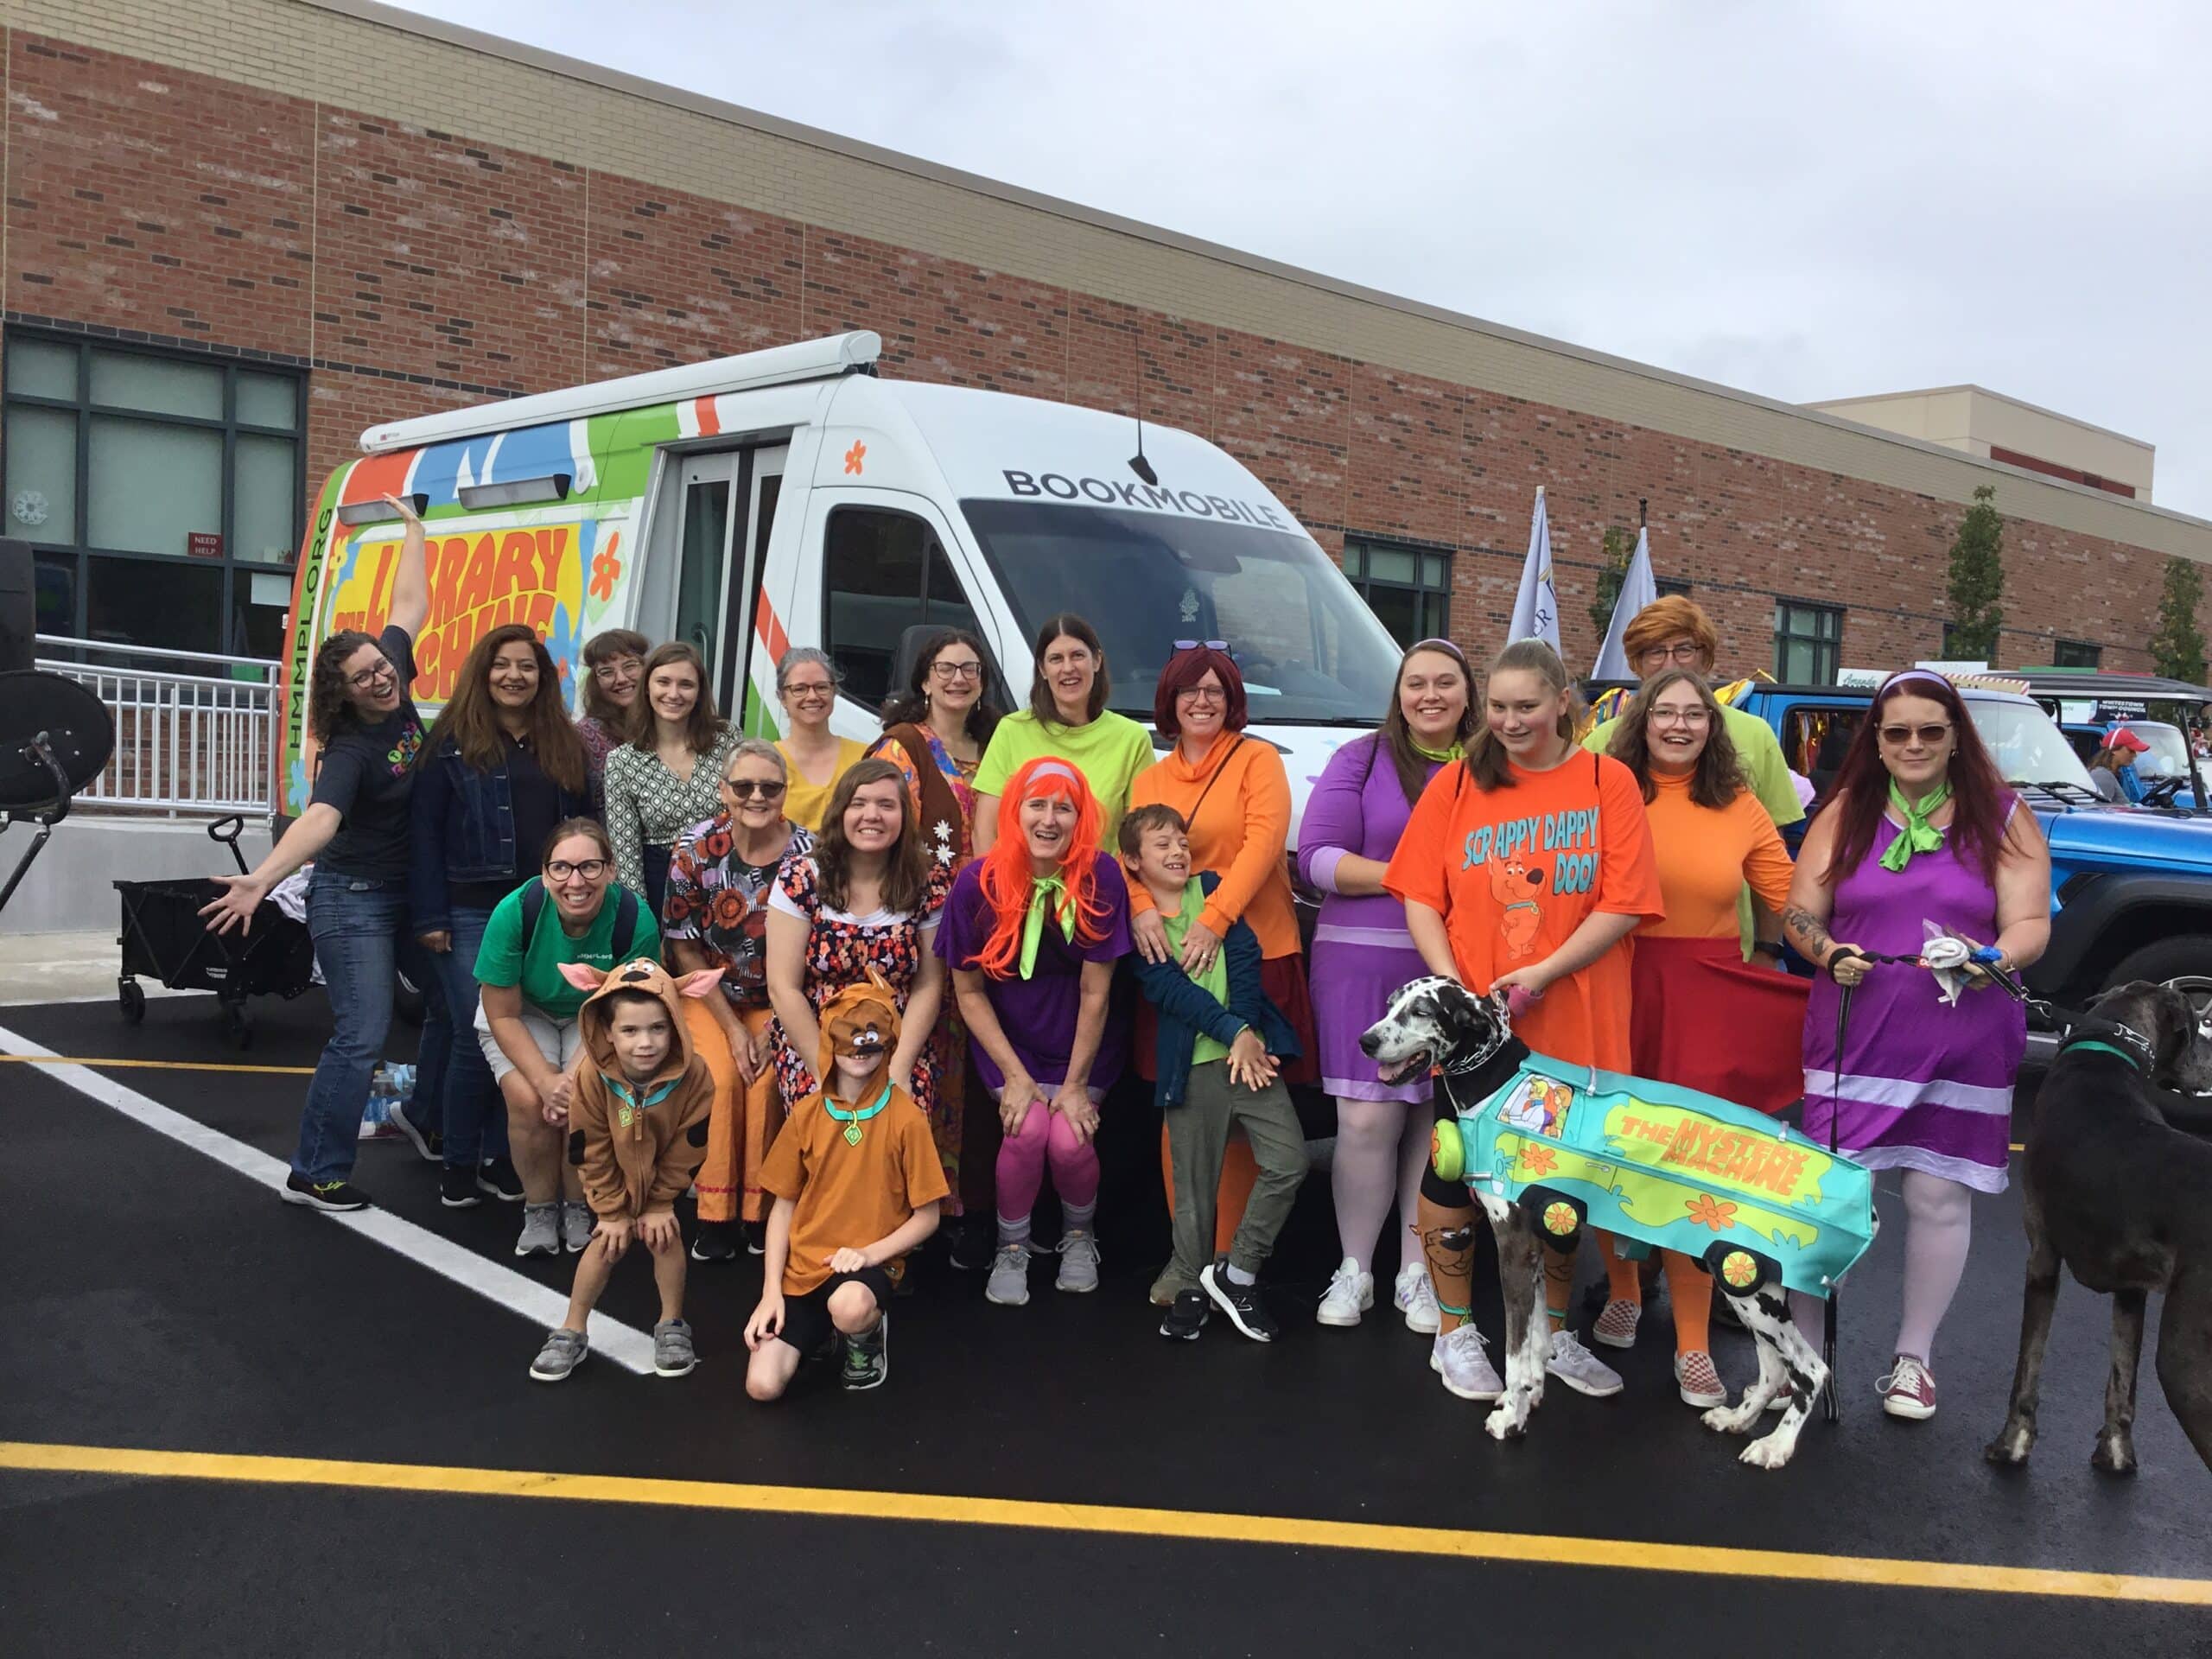 Library staff dressed up at the Scooby Doo gang, with the Bookmobile transformed into the Library Machine (like Mystery Machine from Scooby Doo)